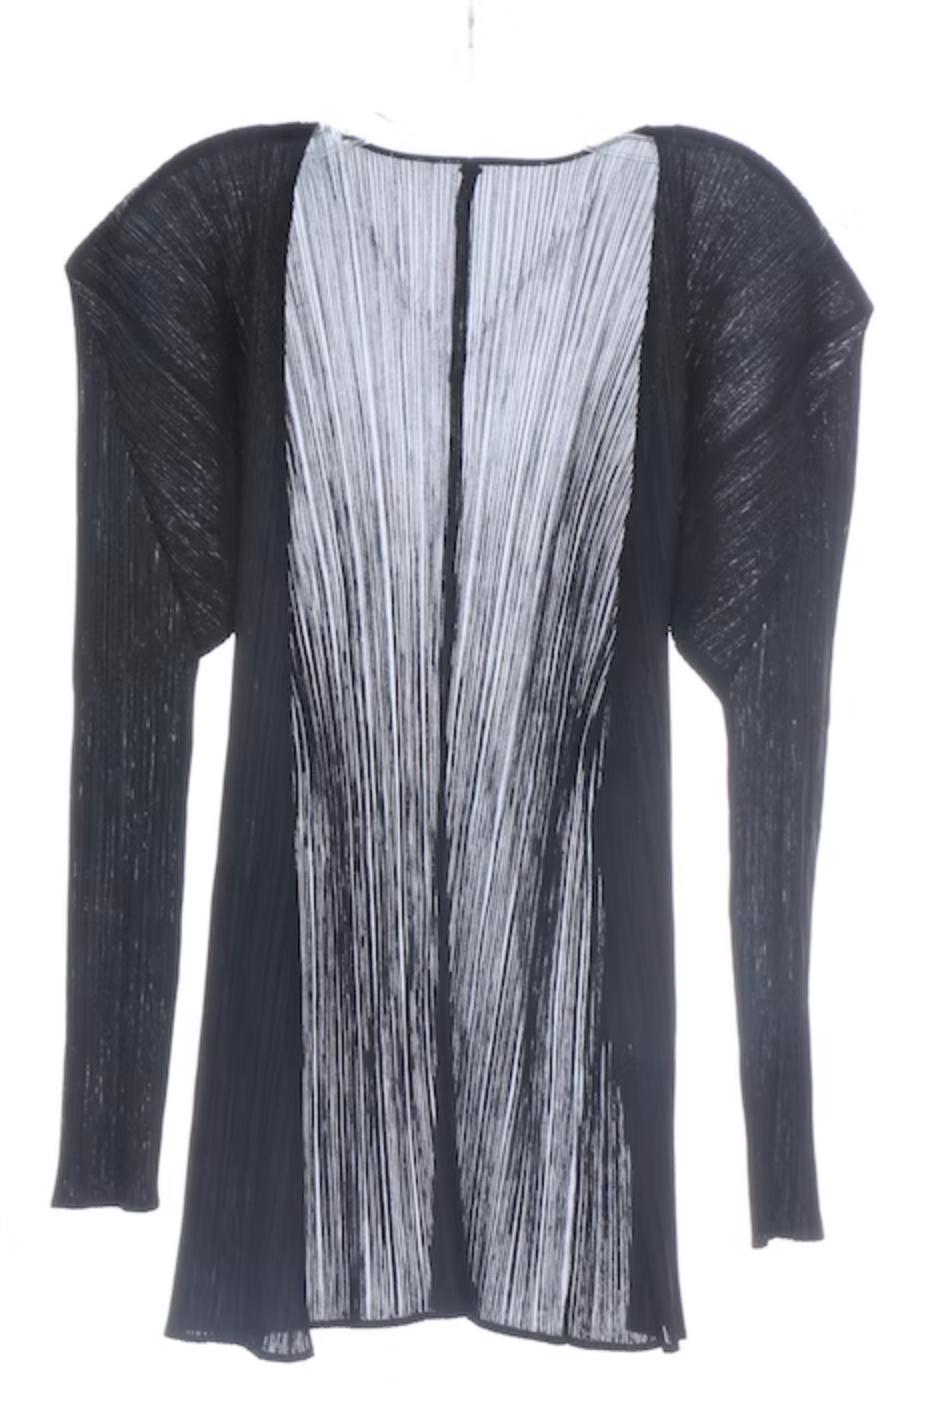 Issey Miyake Pleats Please cardigan, black, square silhouette, priced accordingly (missing tag) 

size 2